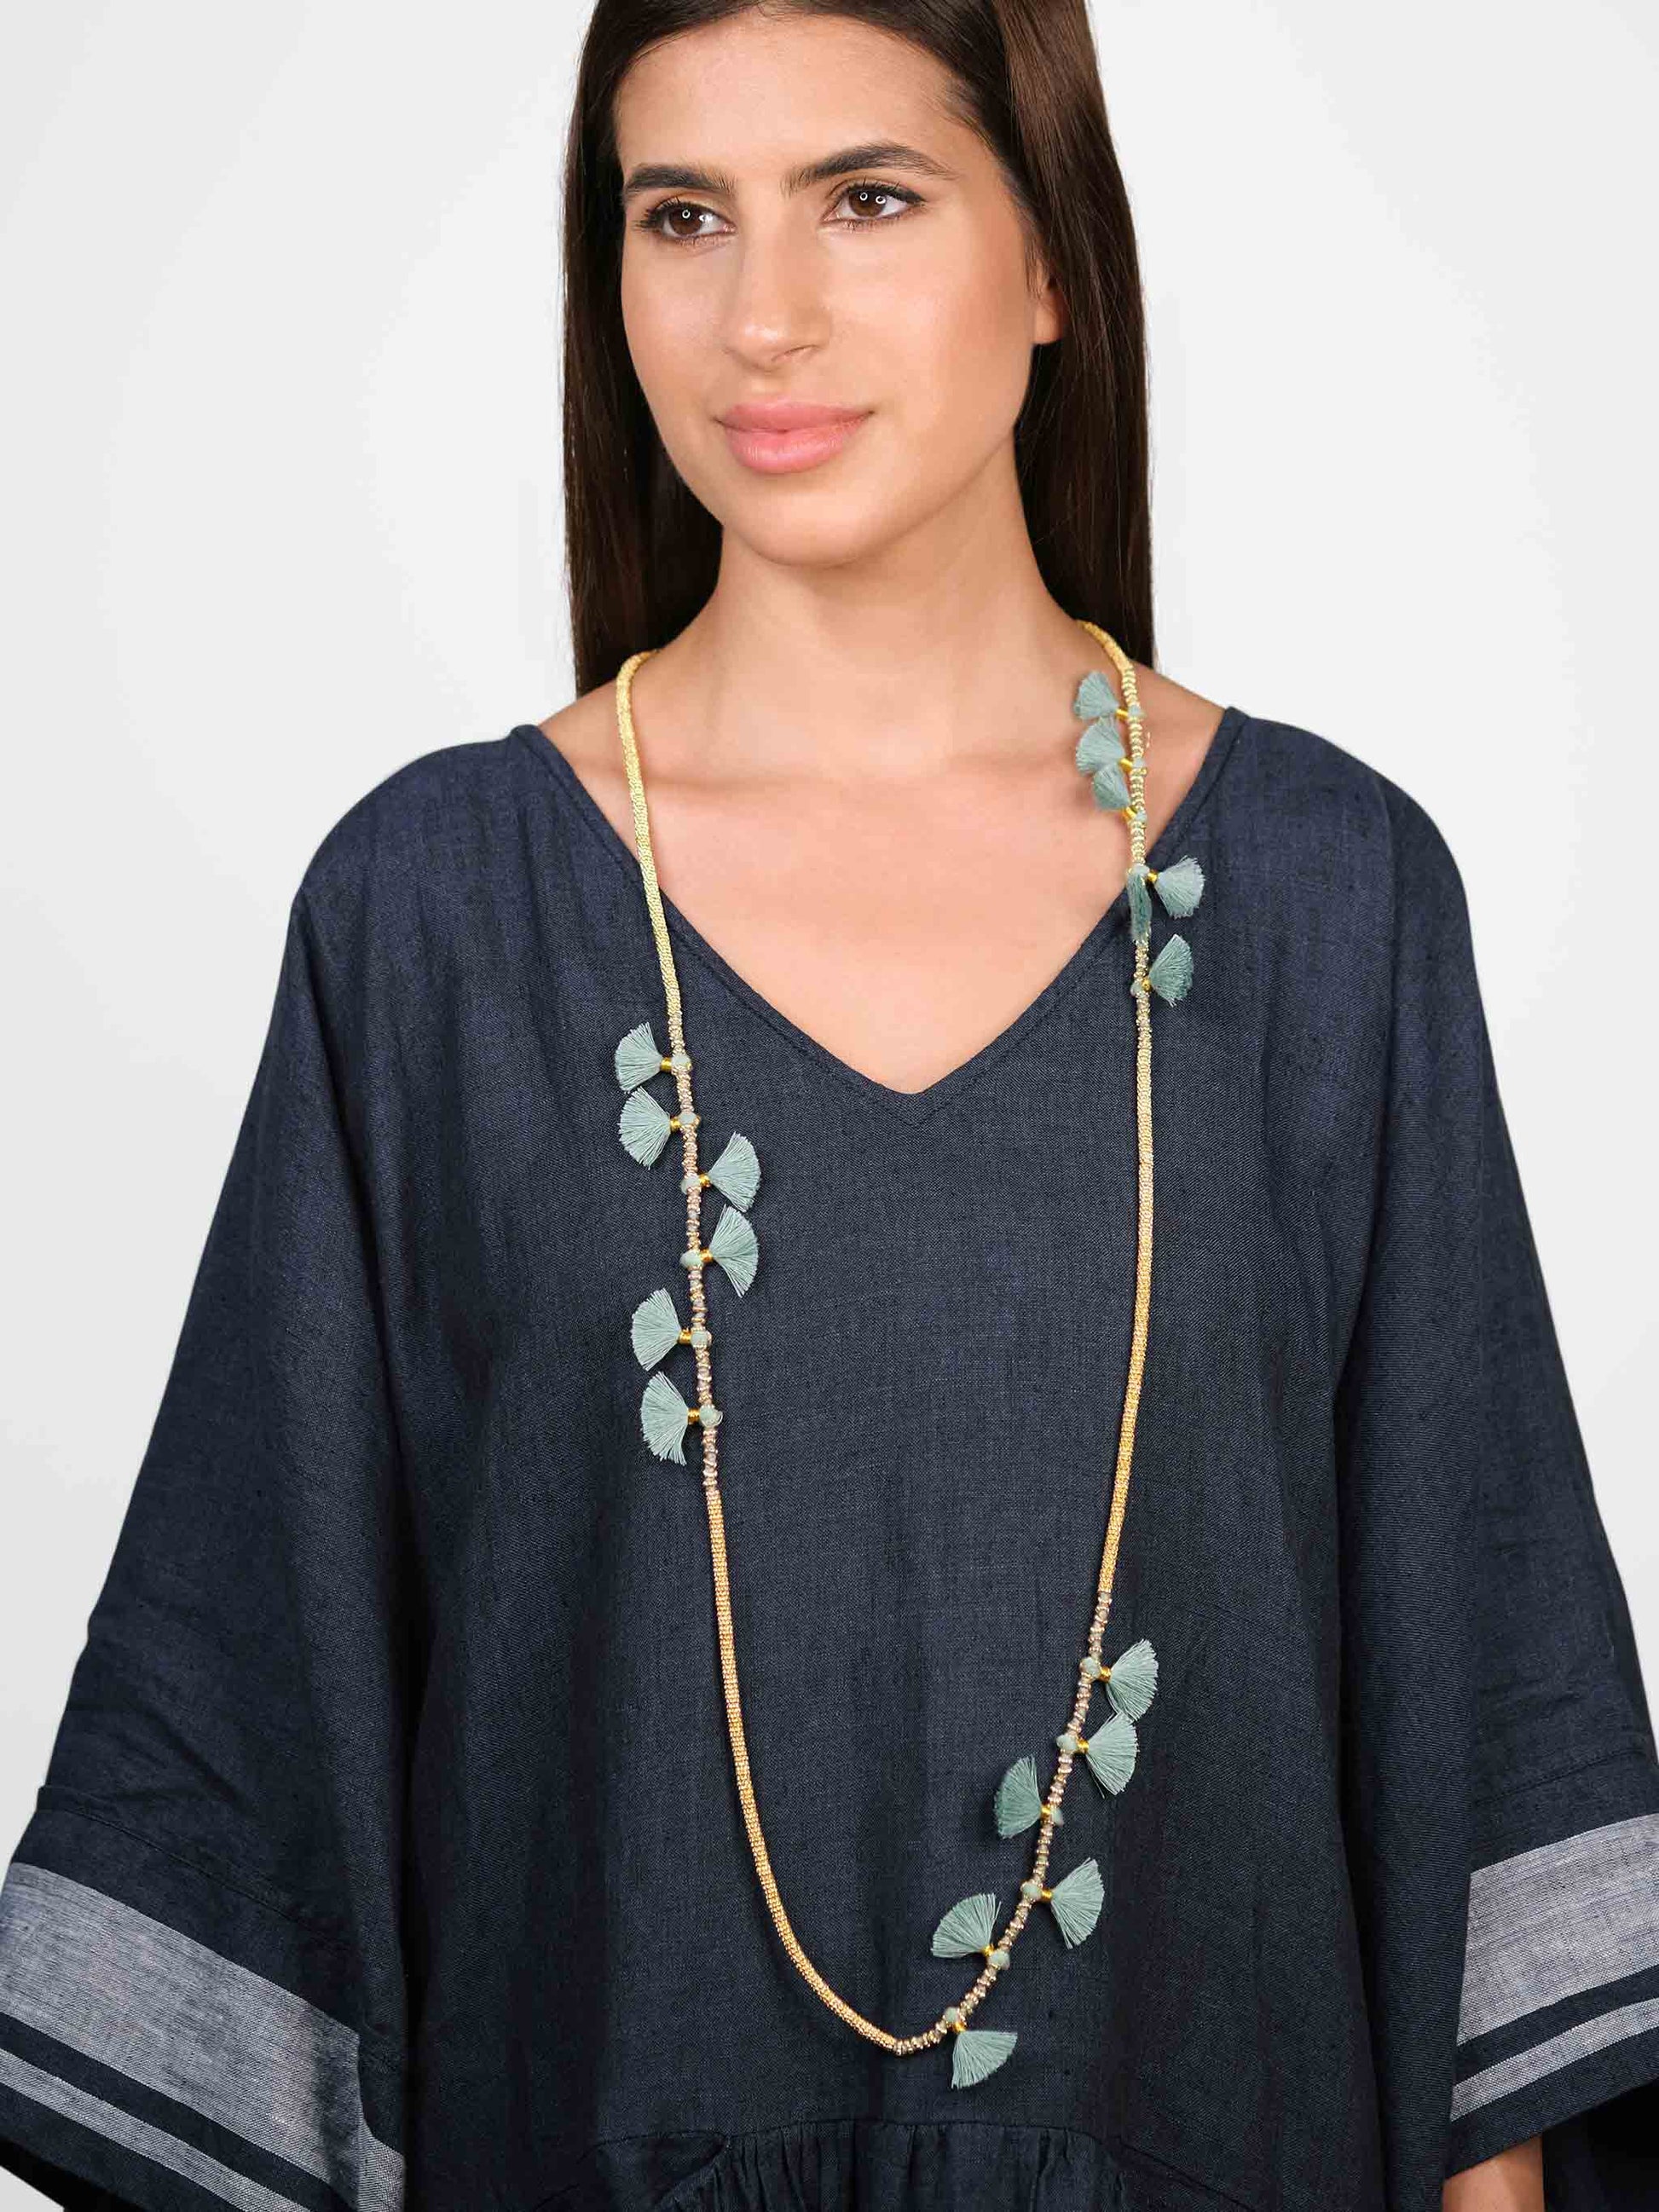 Boho Gold Tone Long Necklace with Teal Blue Tassels